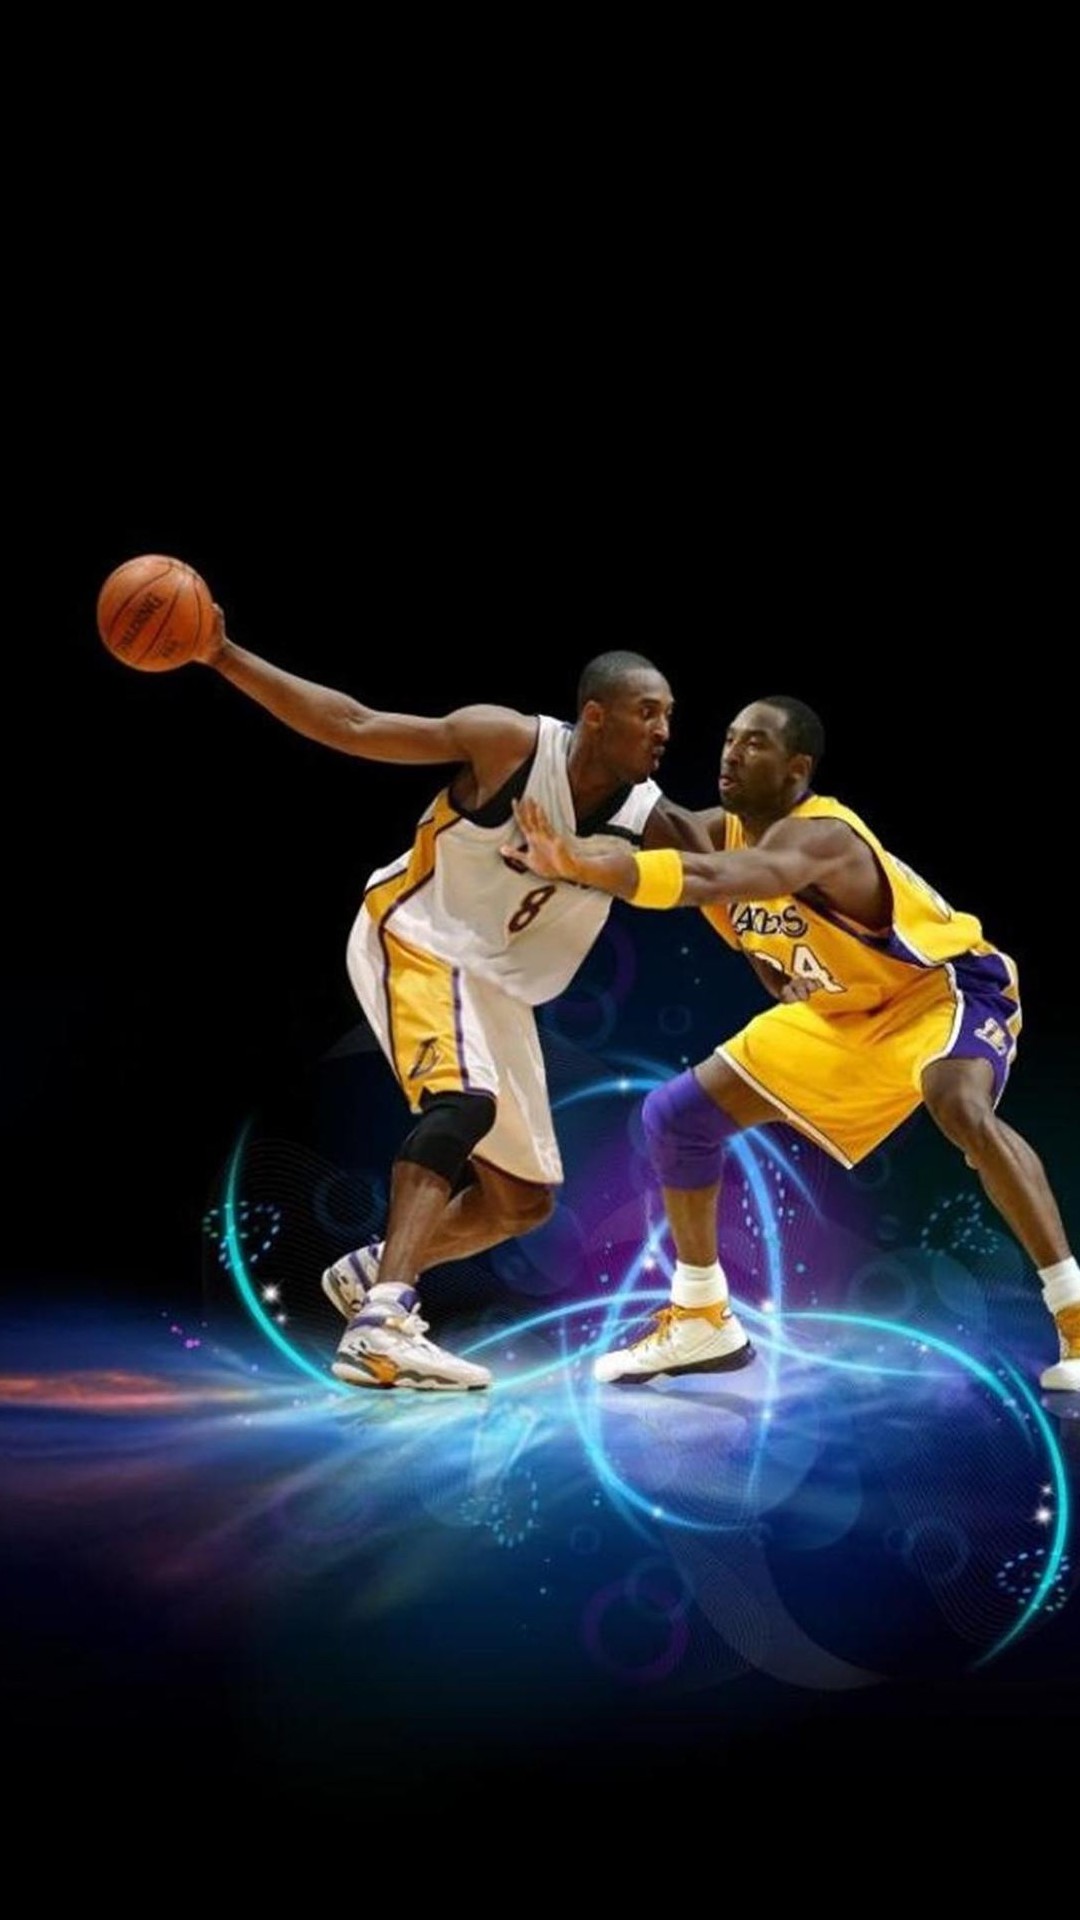 Basketball Wallpaper Iphone - Cool Basketball Wallpapers For Iphone , HD Wallpaper & Backgrounds